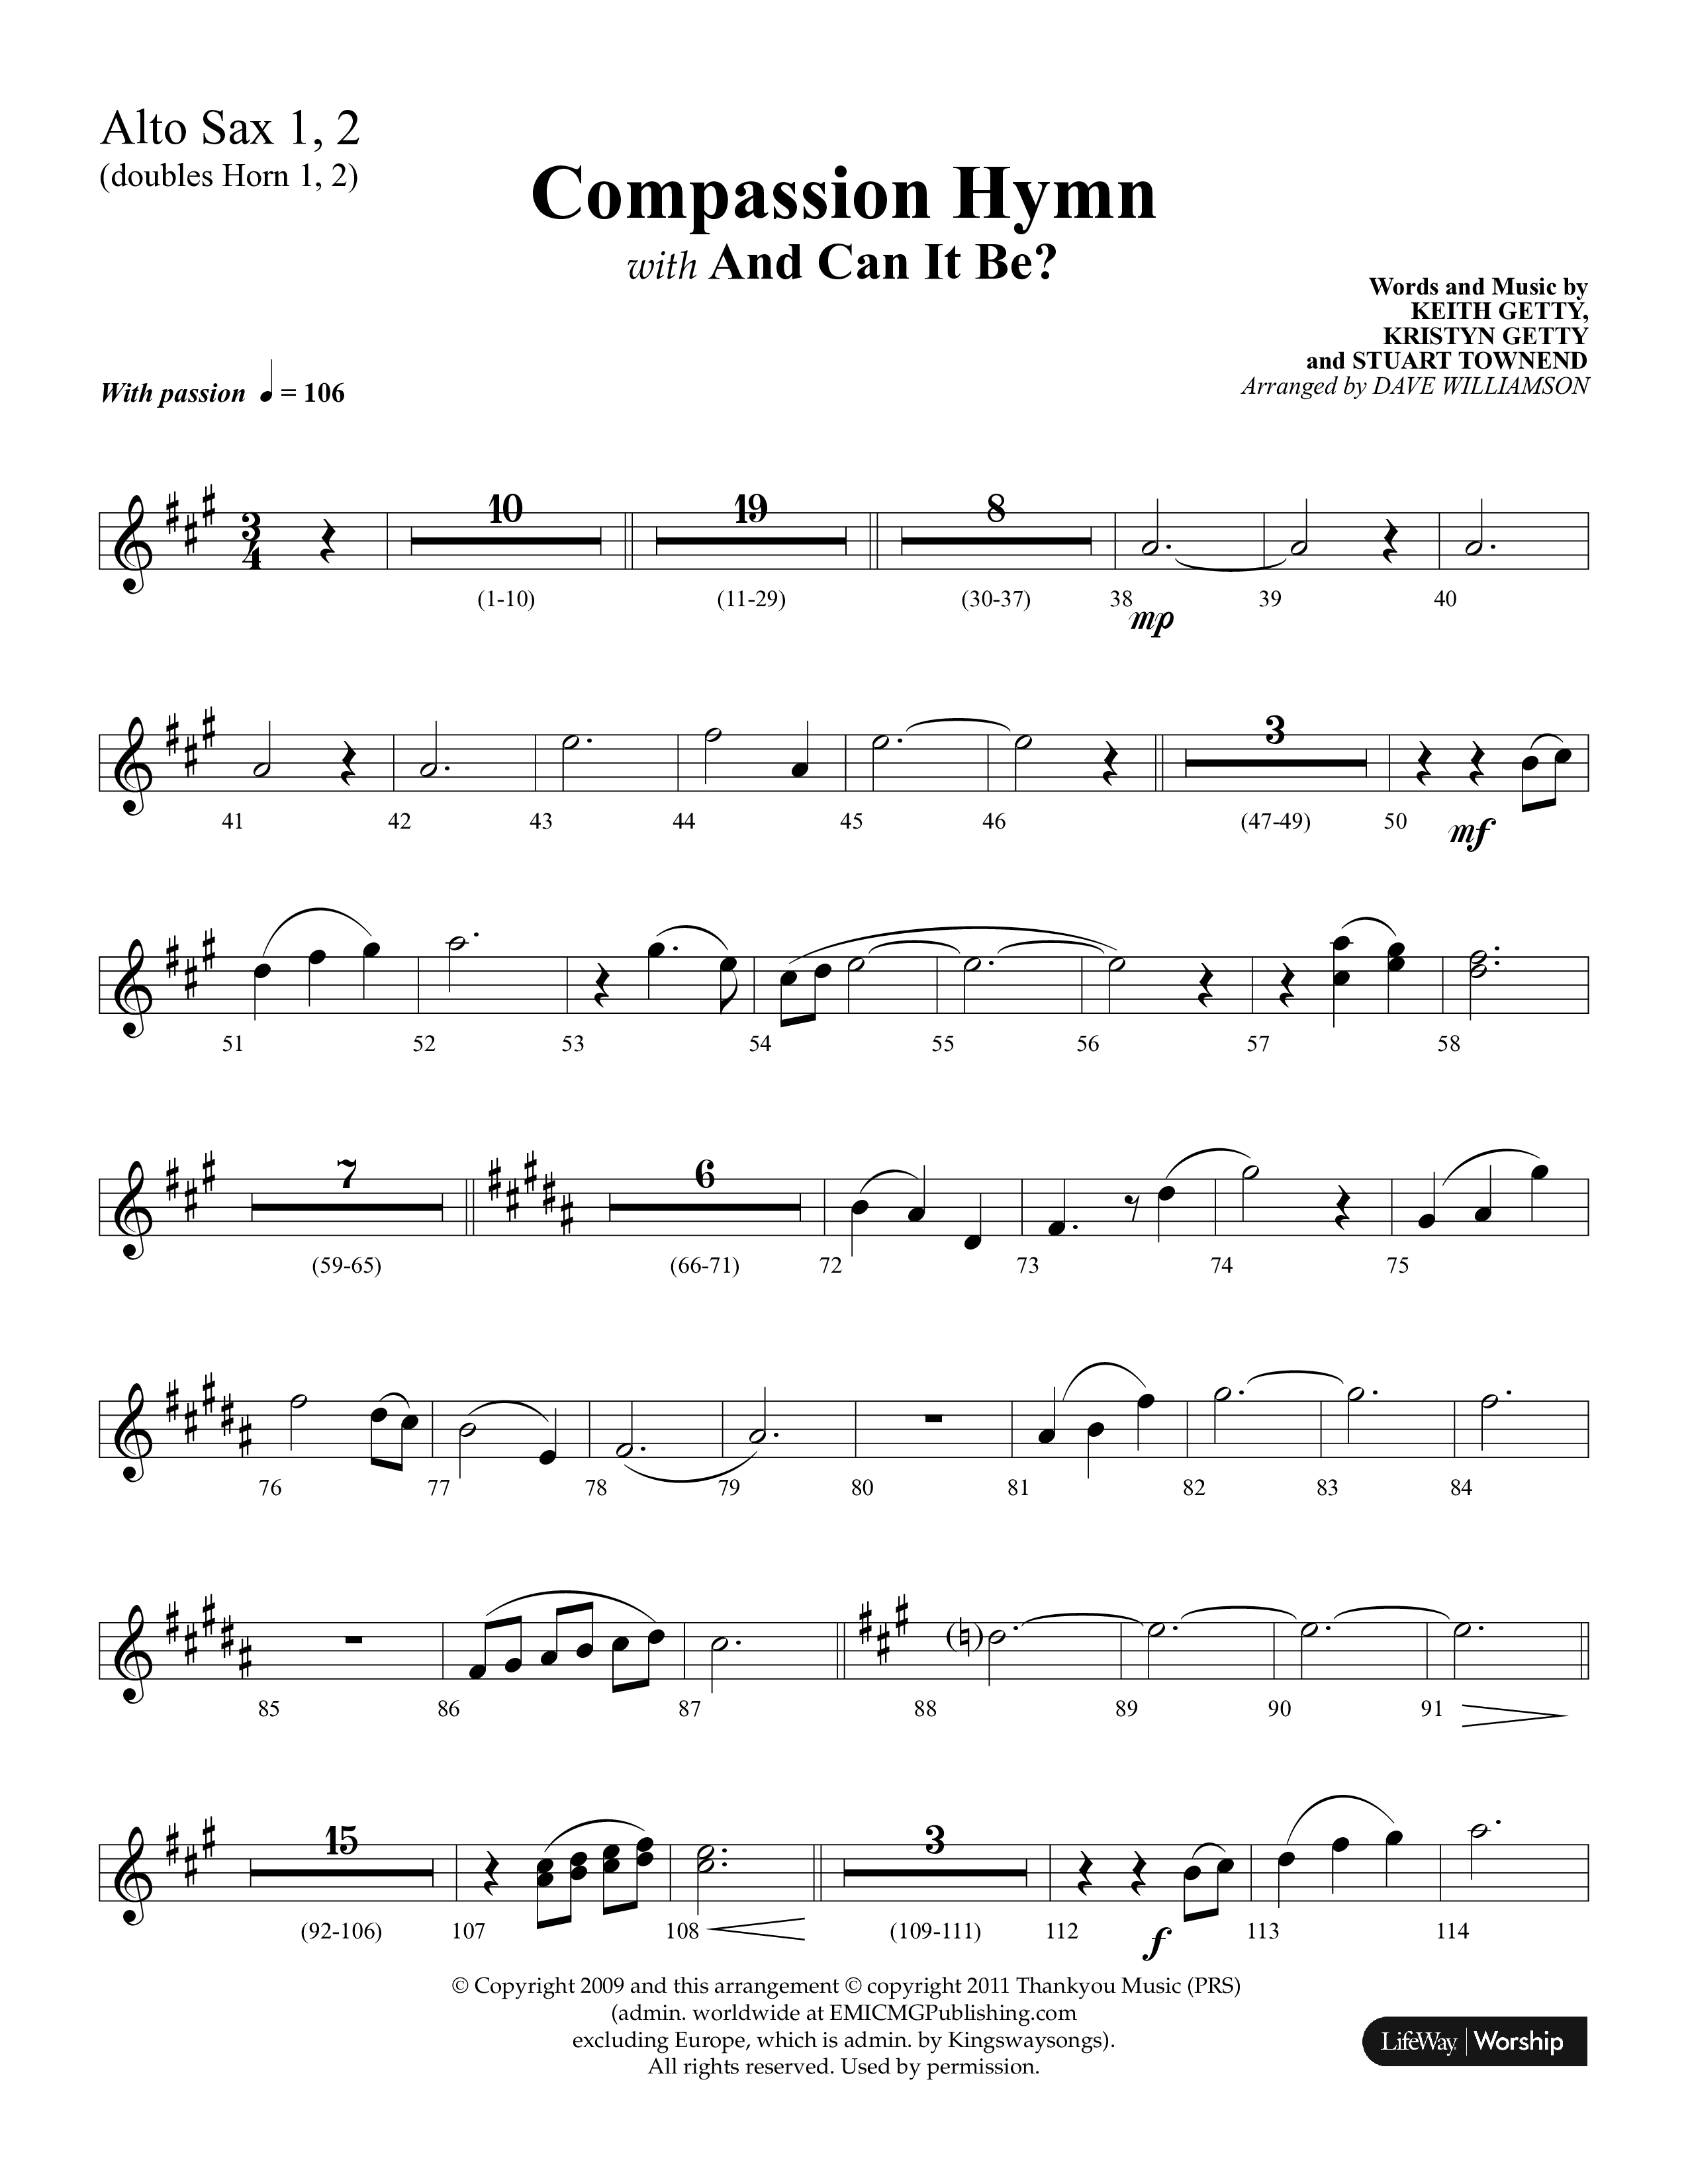 Compassion Hymn (with And Can It Be) (Choral Anthem SATB) Alto Sax 1/2 (Lifeway Choral / Arr. Dave Williamson)